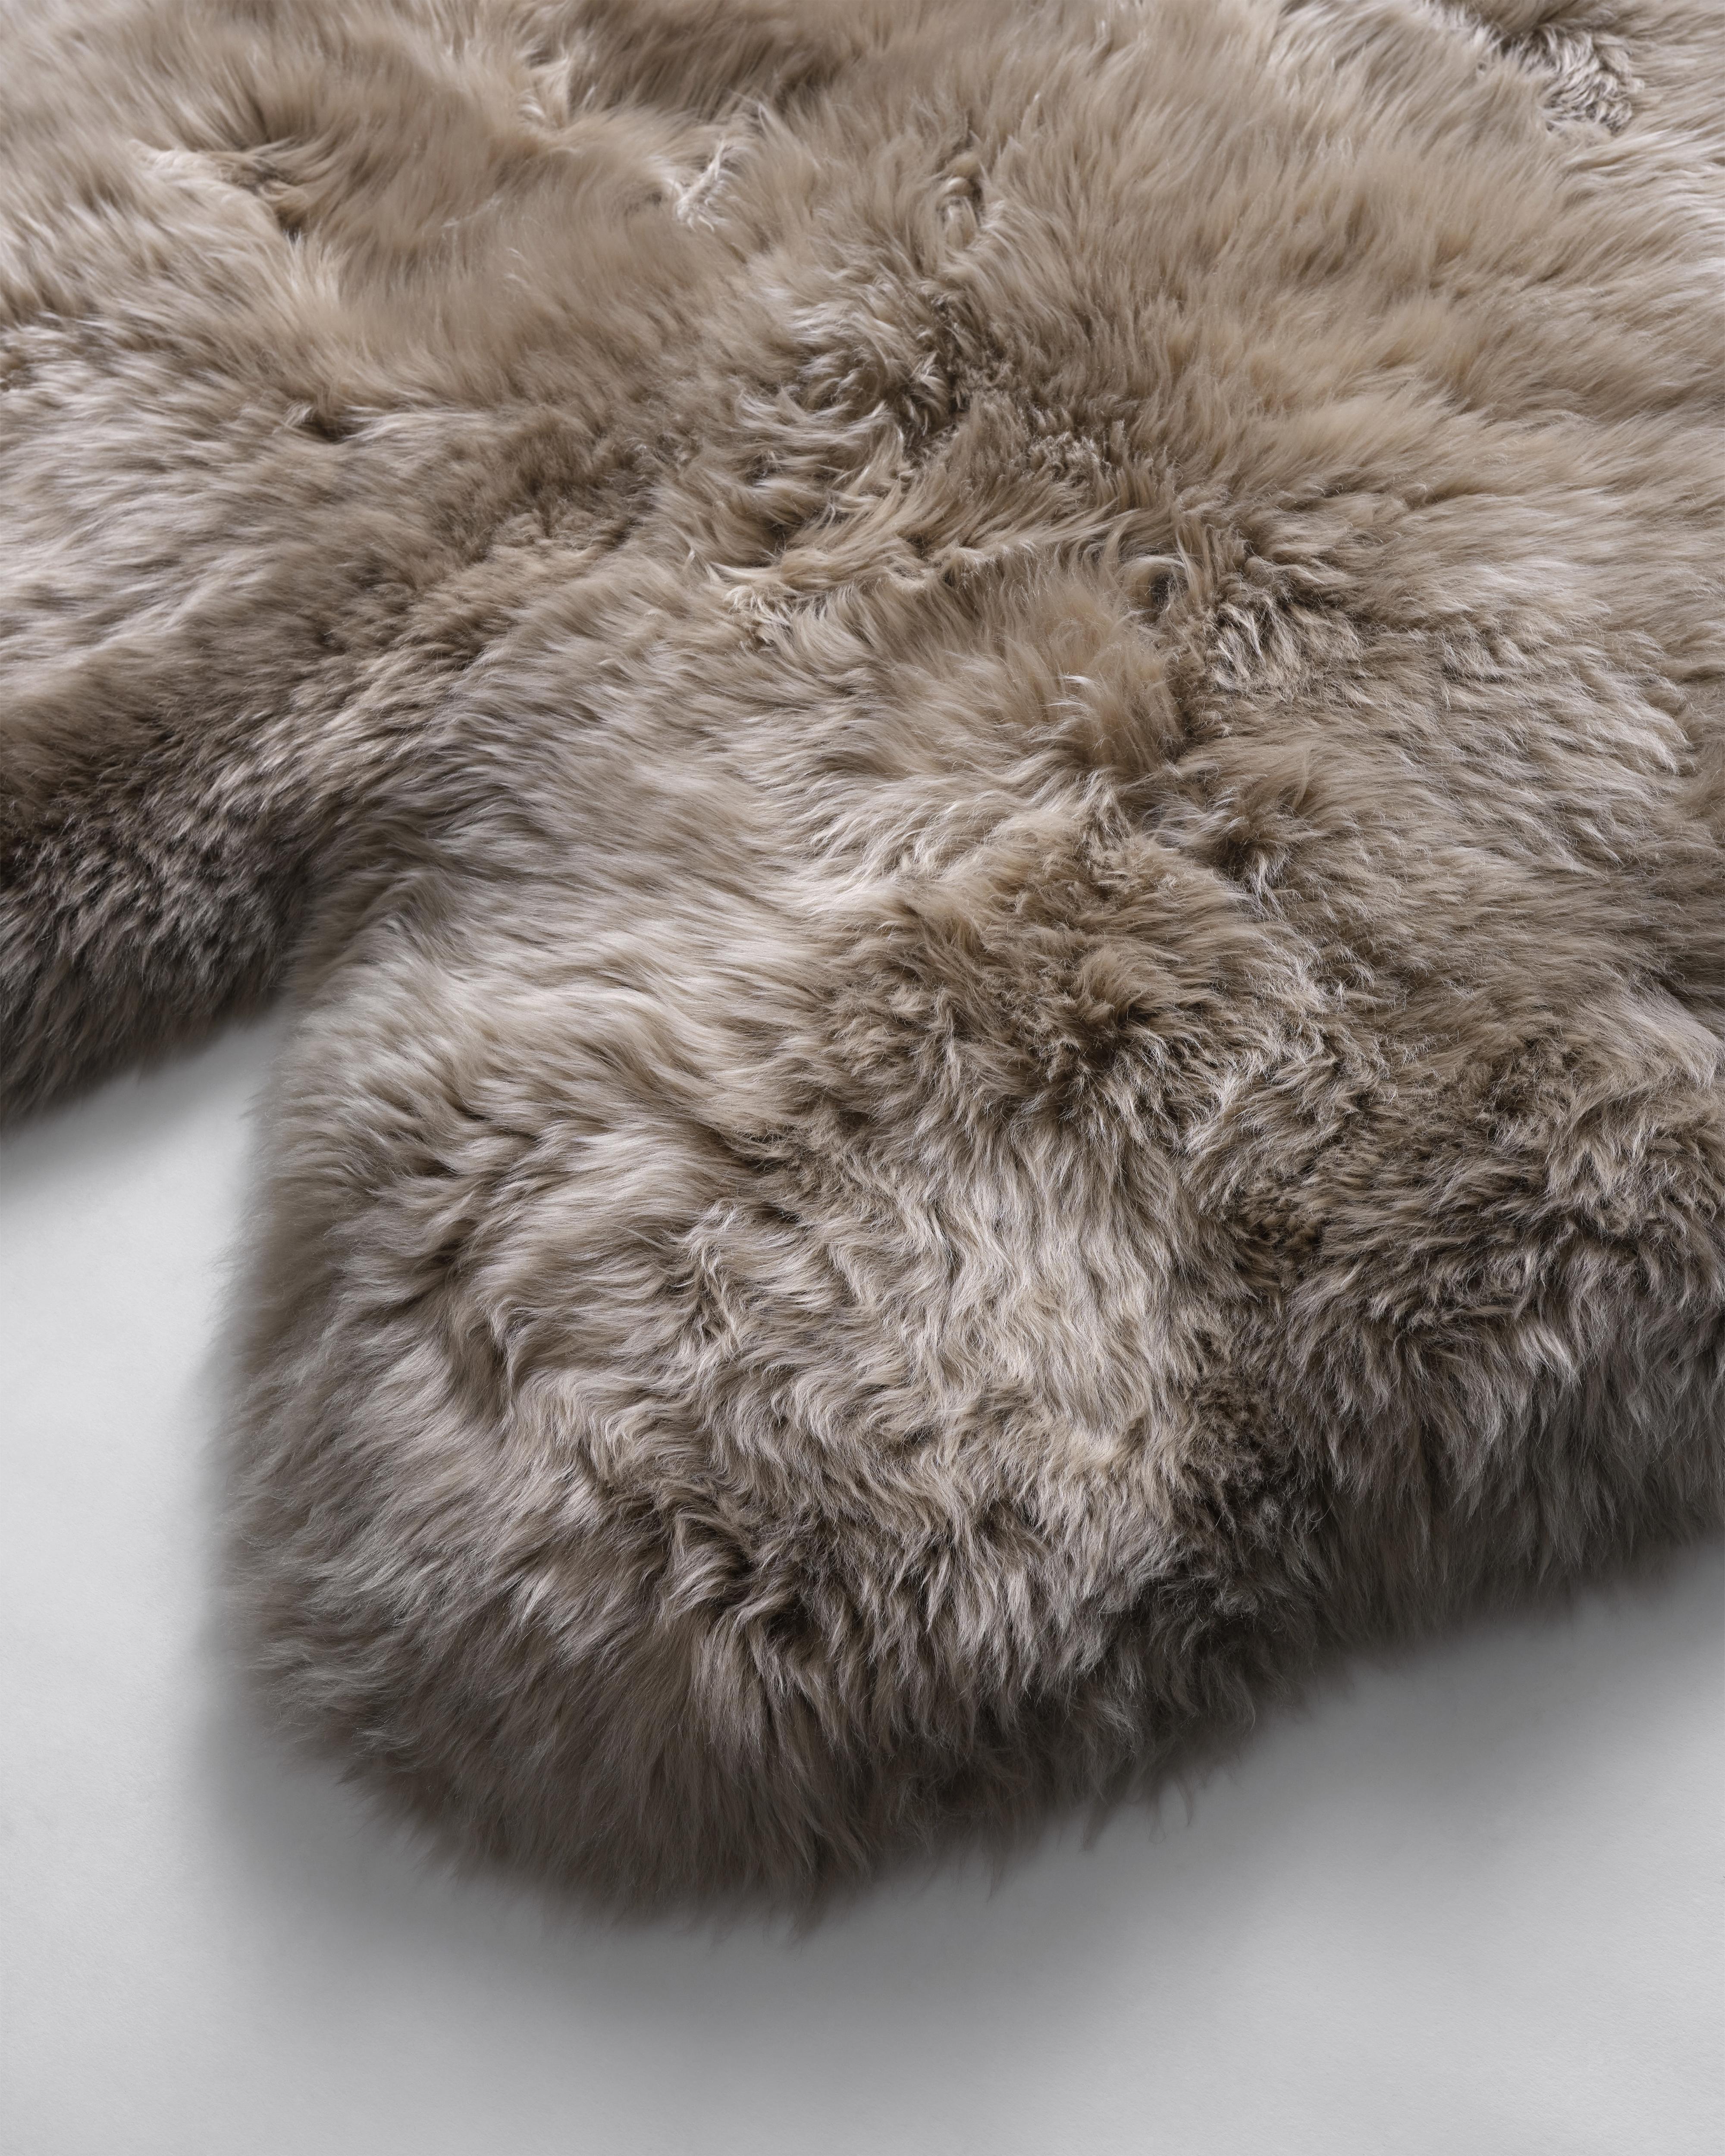 The naturalness and softness of a sheepskin rug can quickly elevate a room's beauty. On the floor, thrown over chairs and couches, this versatile design piece is a favorite of the Forsyth design team. 

This thick and beautiful sheepskin, dyed a